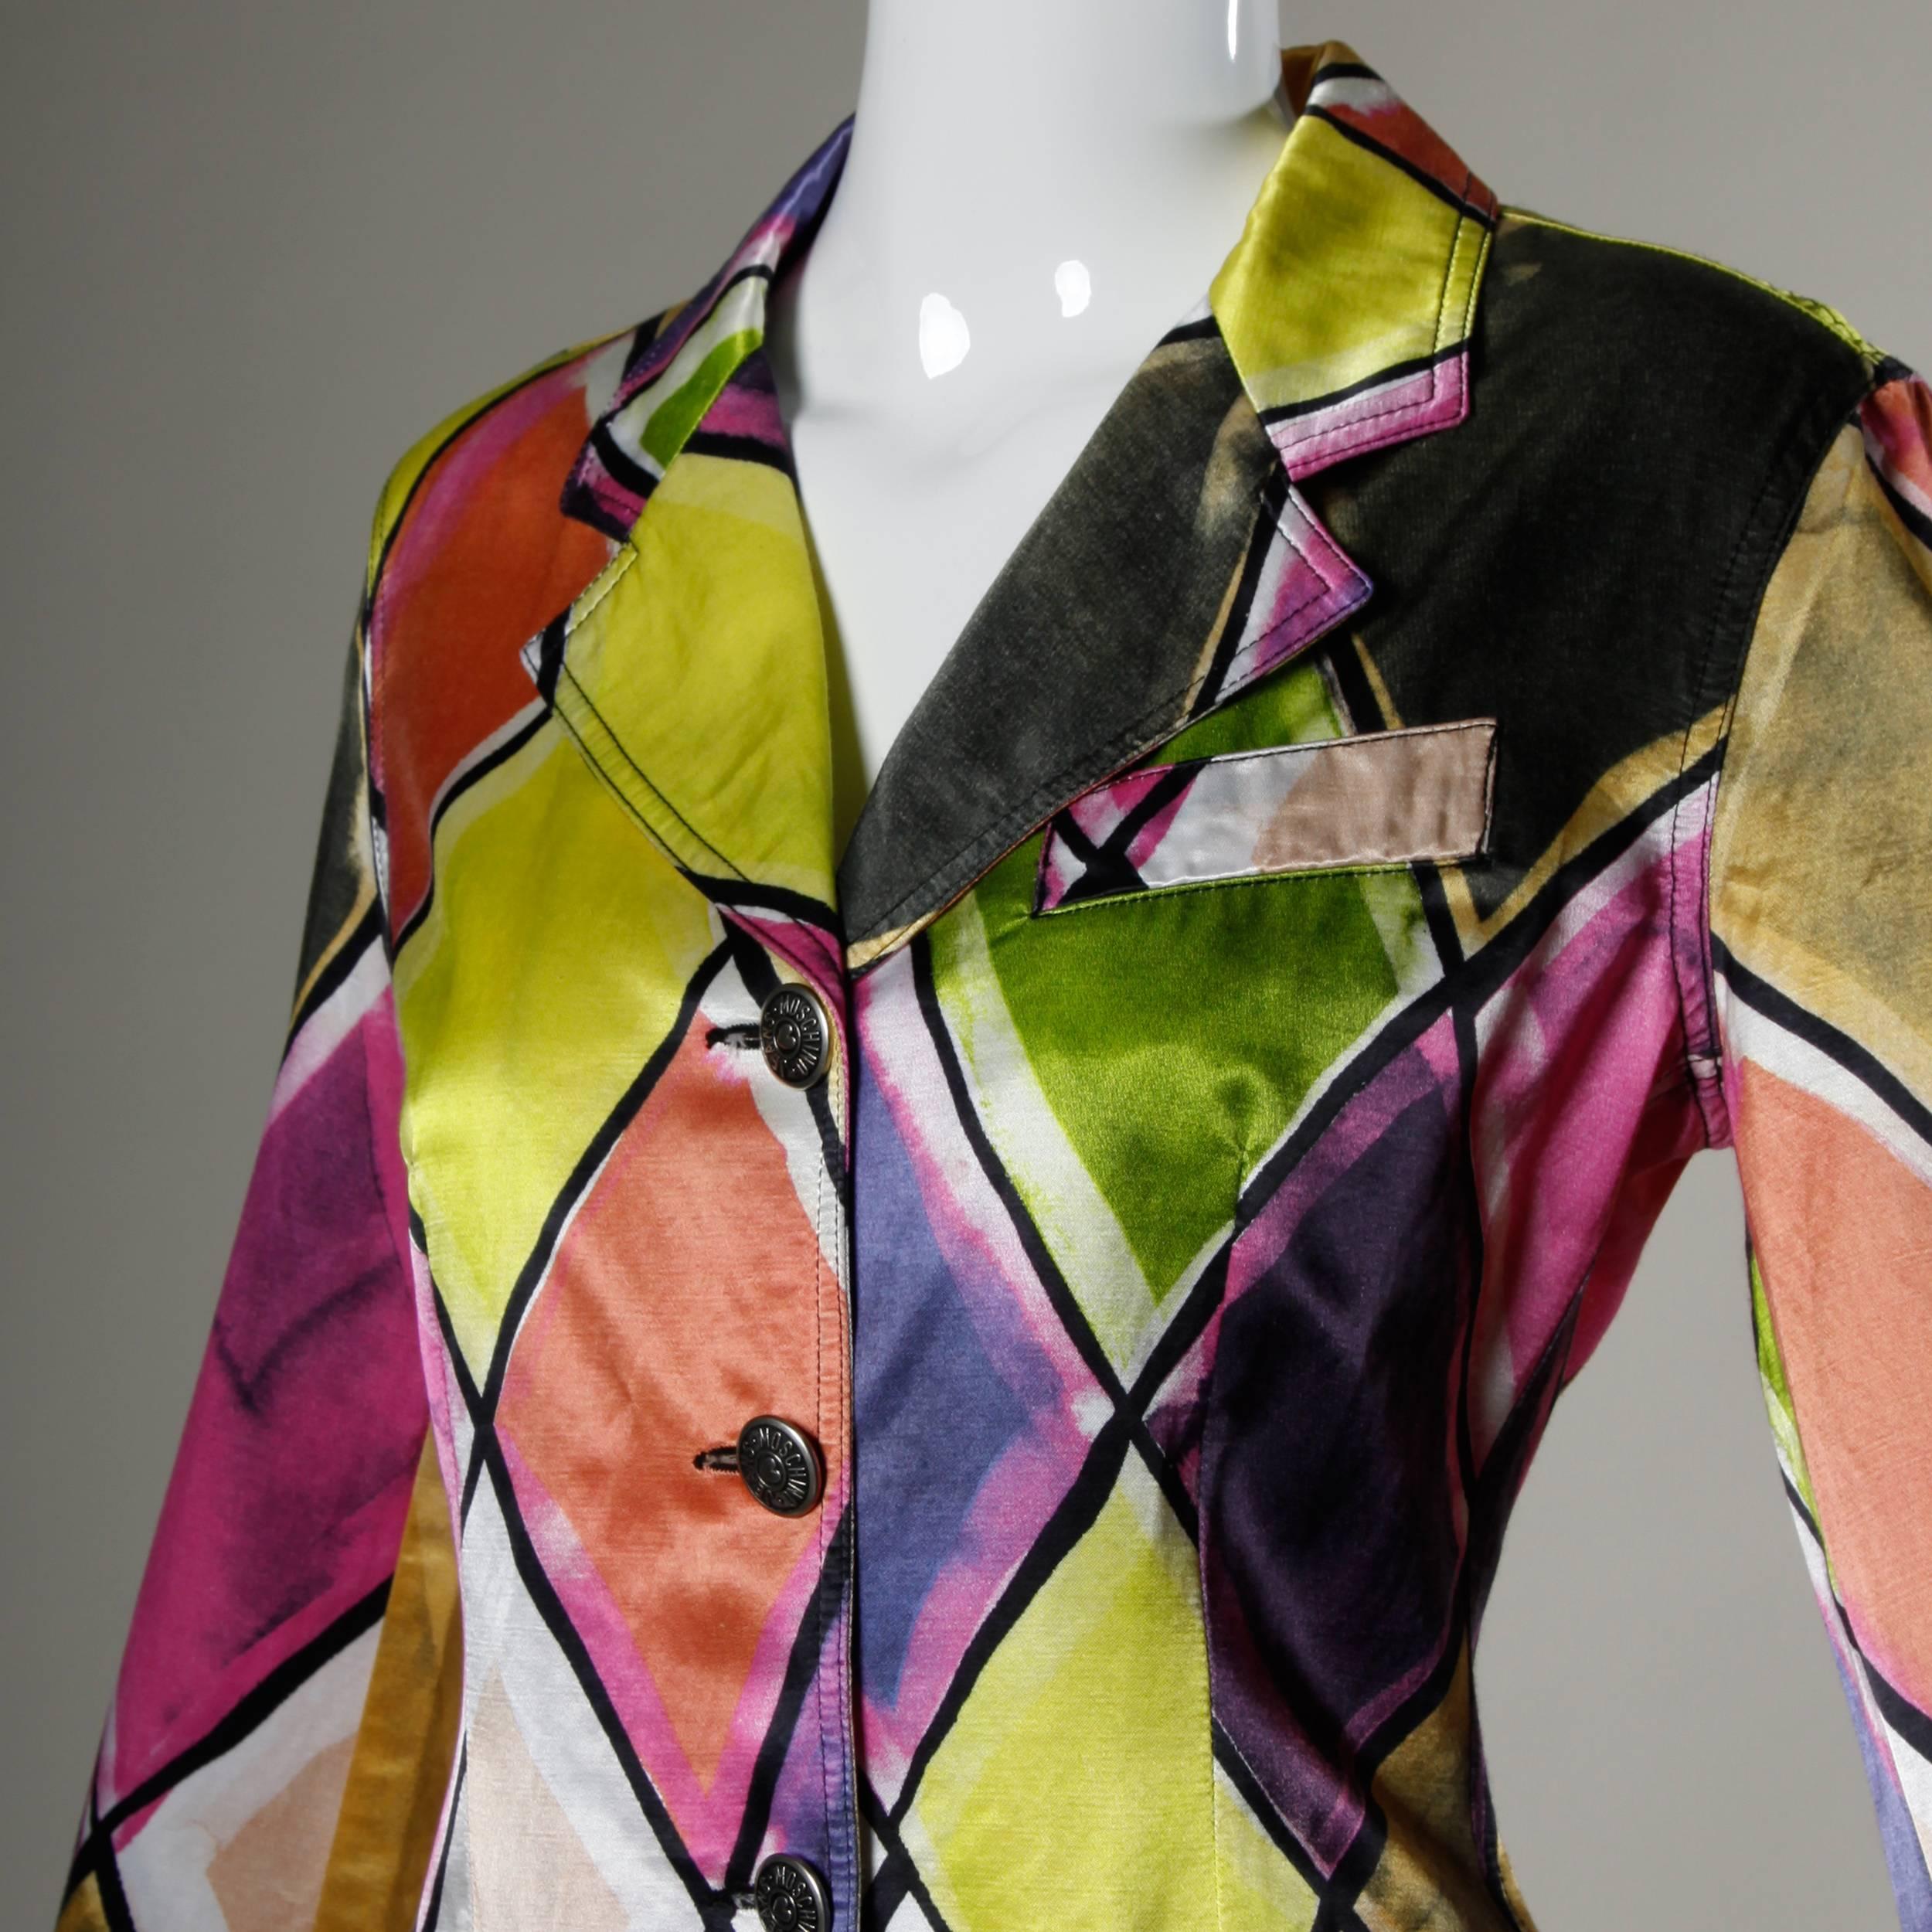 Vintage Moschino Jeans blazer jacket in a vibrant painterly 